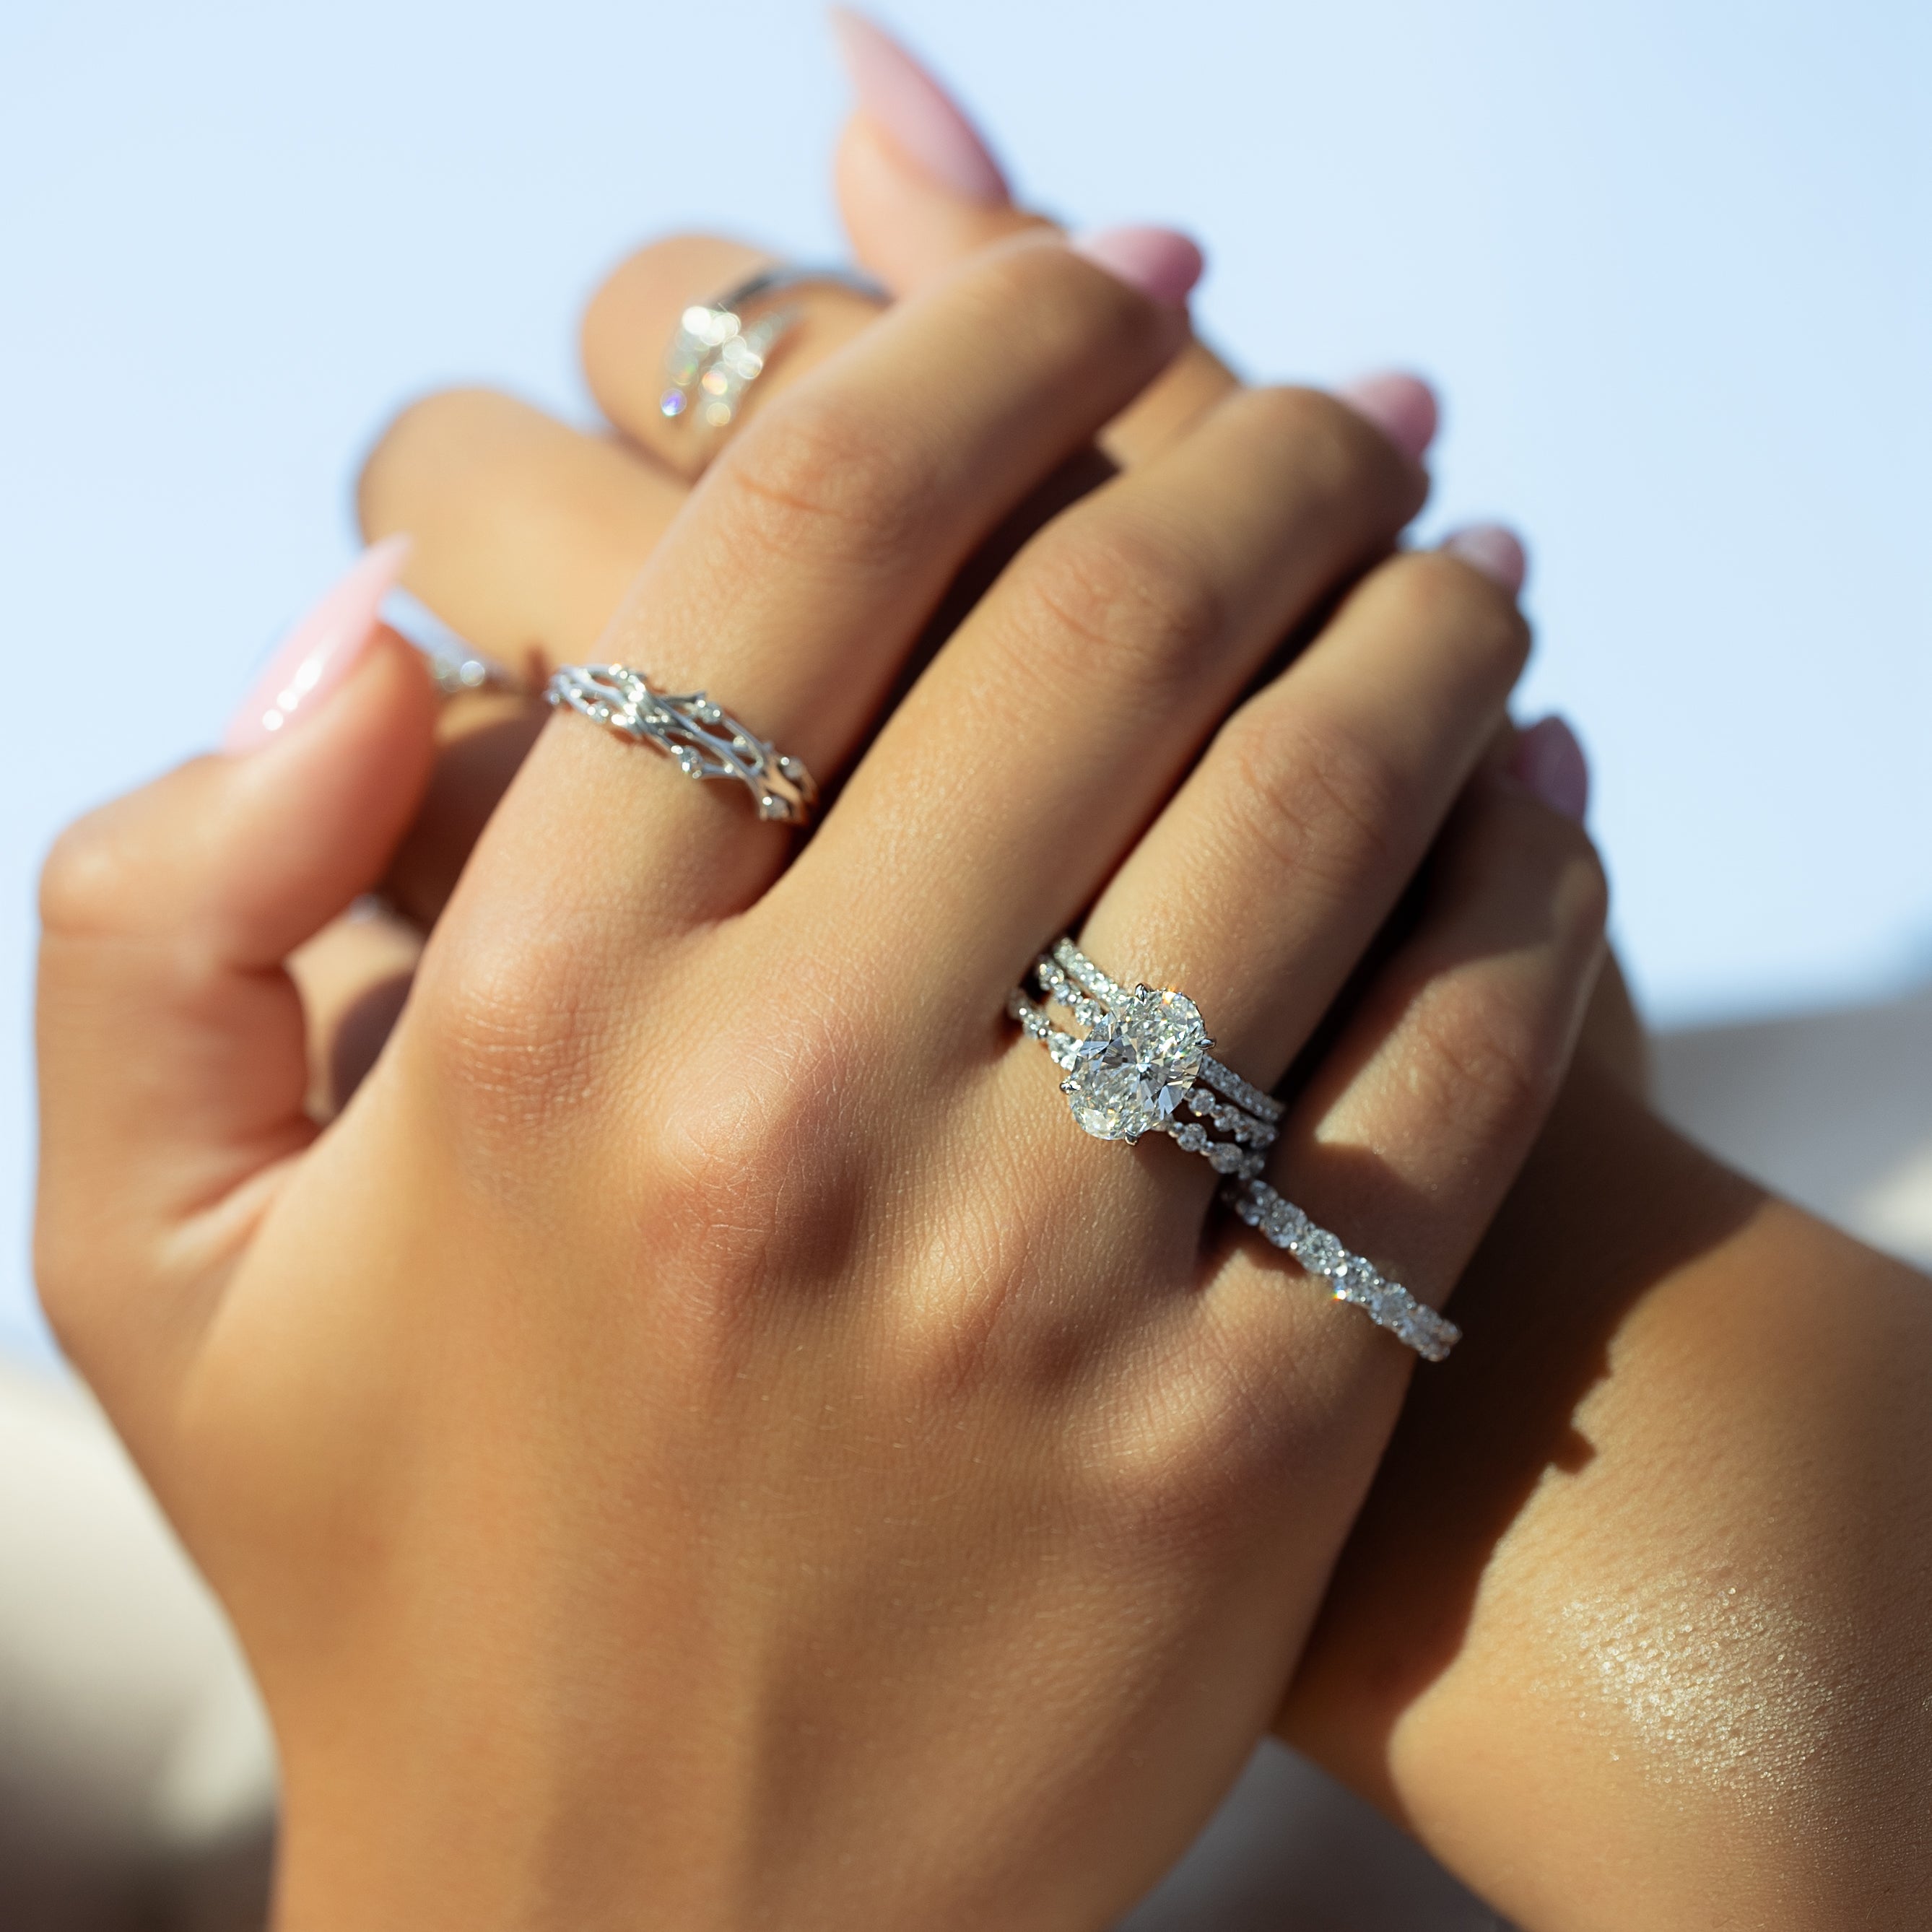 4 Reasons Why You Should Buy Your Engagement Ring on Black Friday